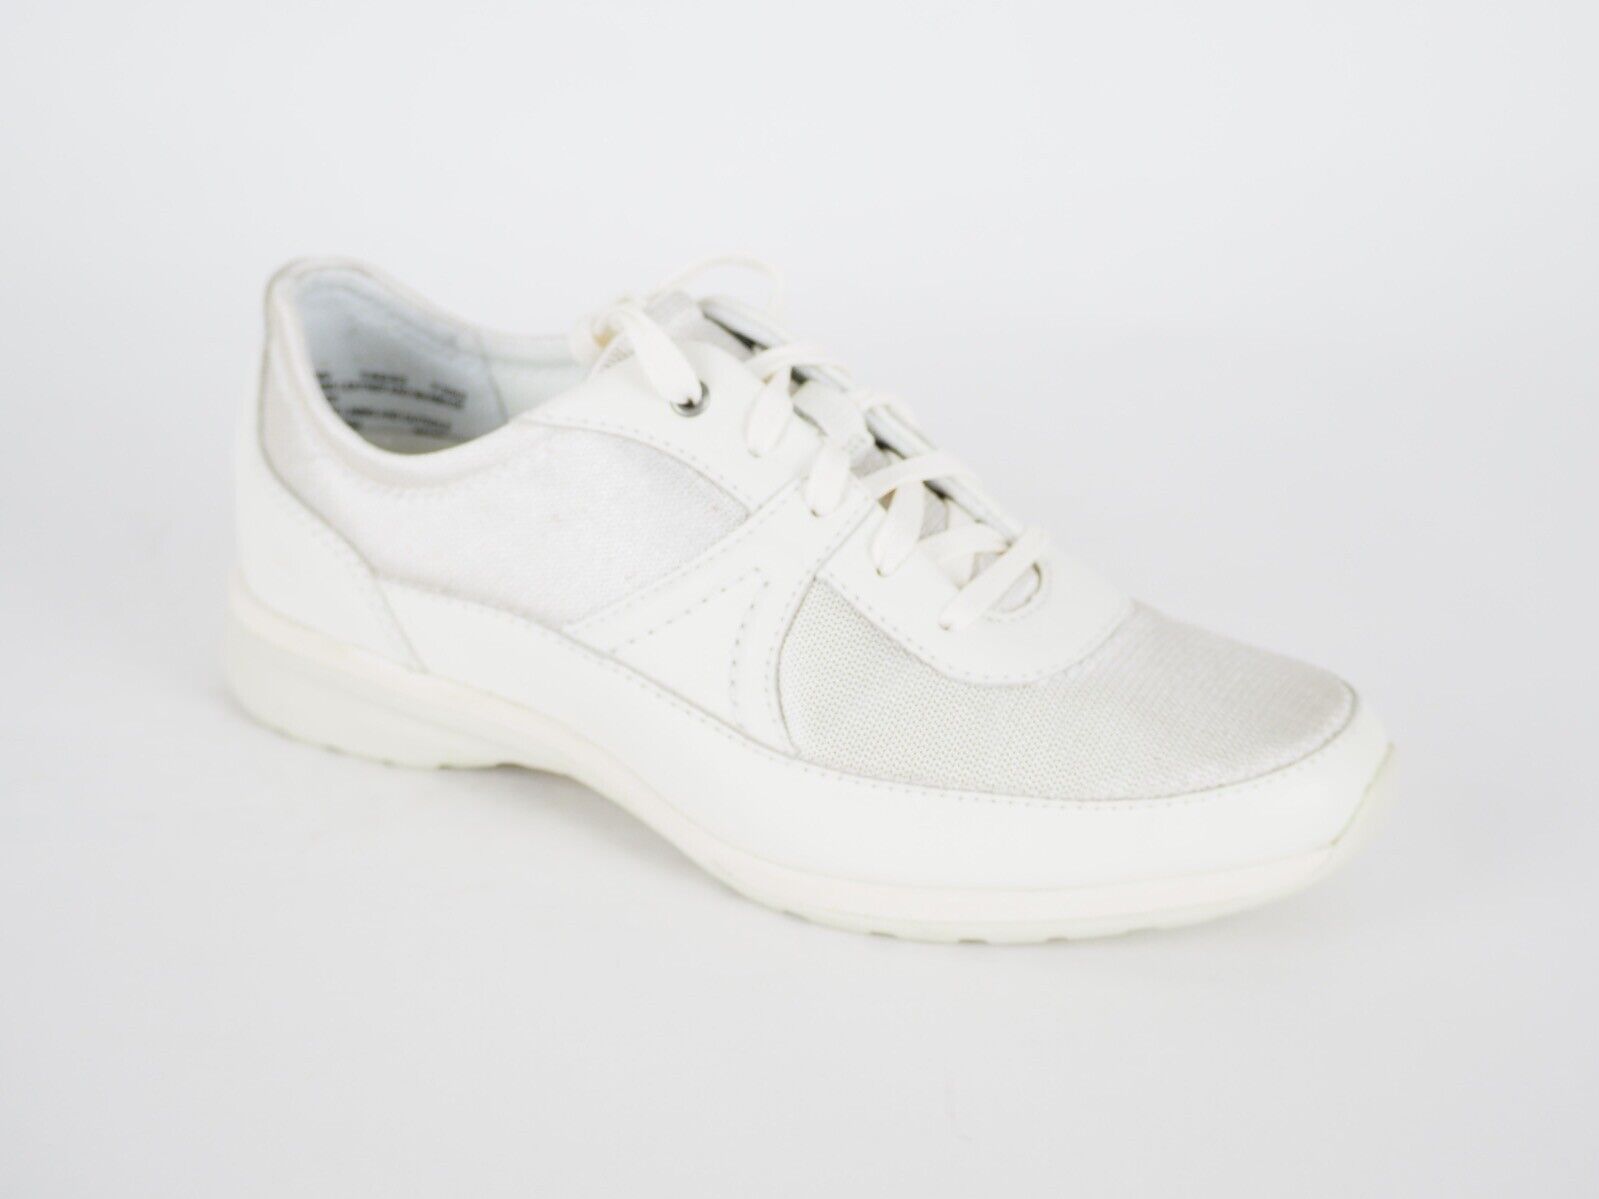 Womens Timberland Killington Park 14642 Off White Leather Fabric Laced Trainers - London Top Style